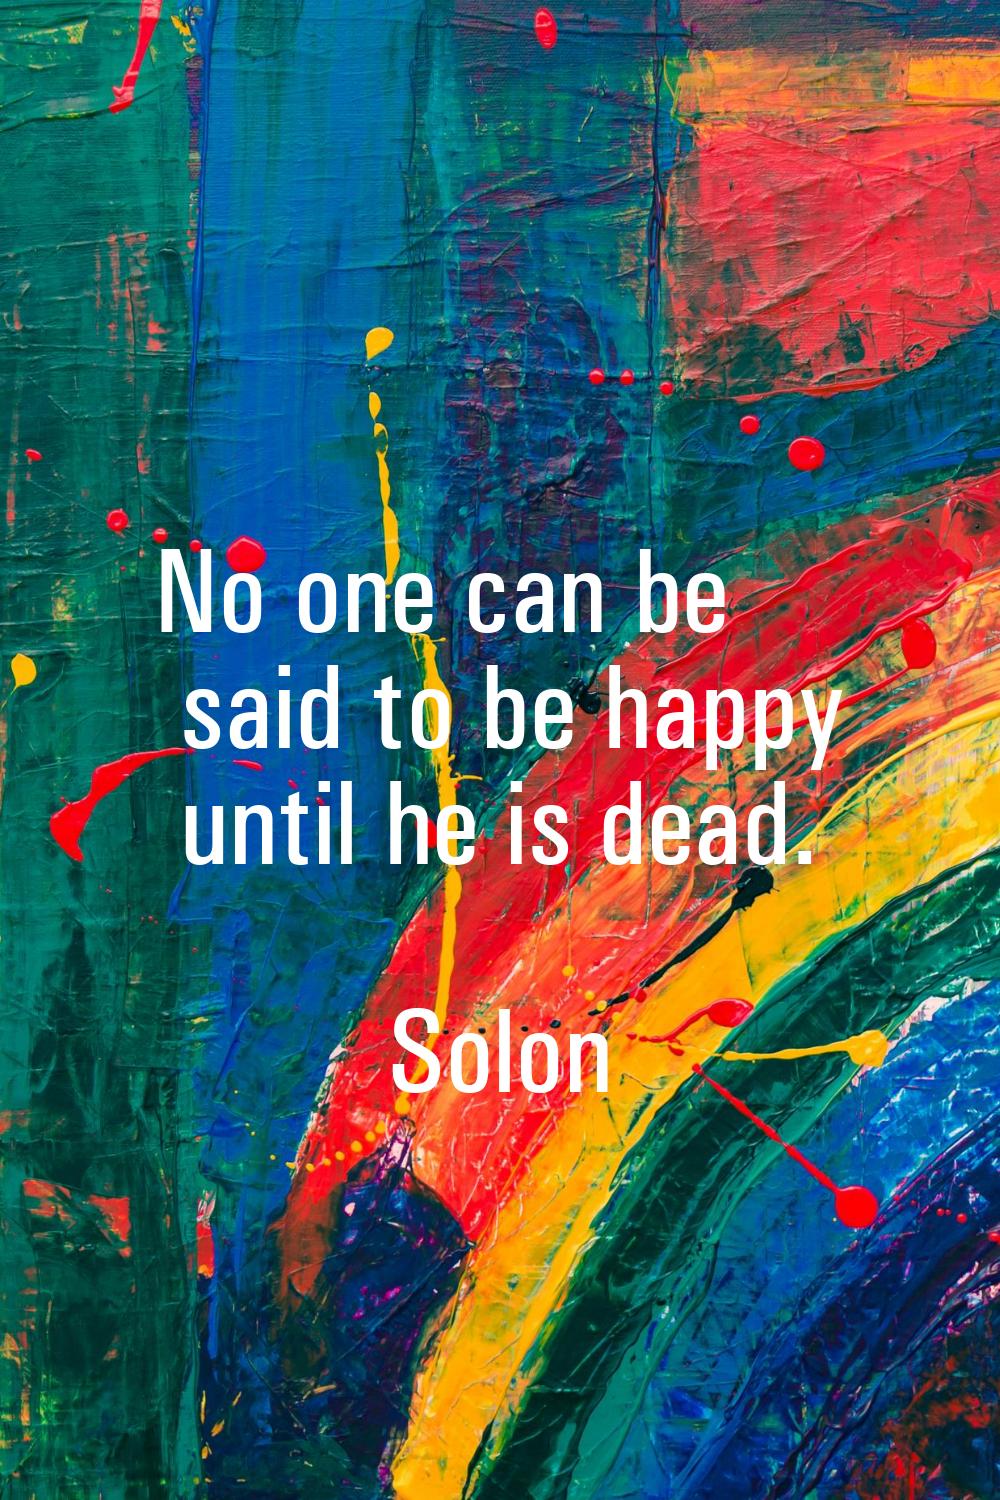 No one can be said to be happy until he is dead.